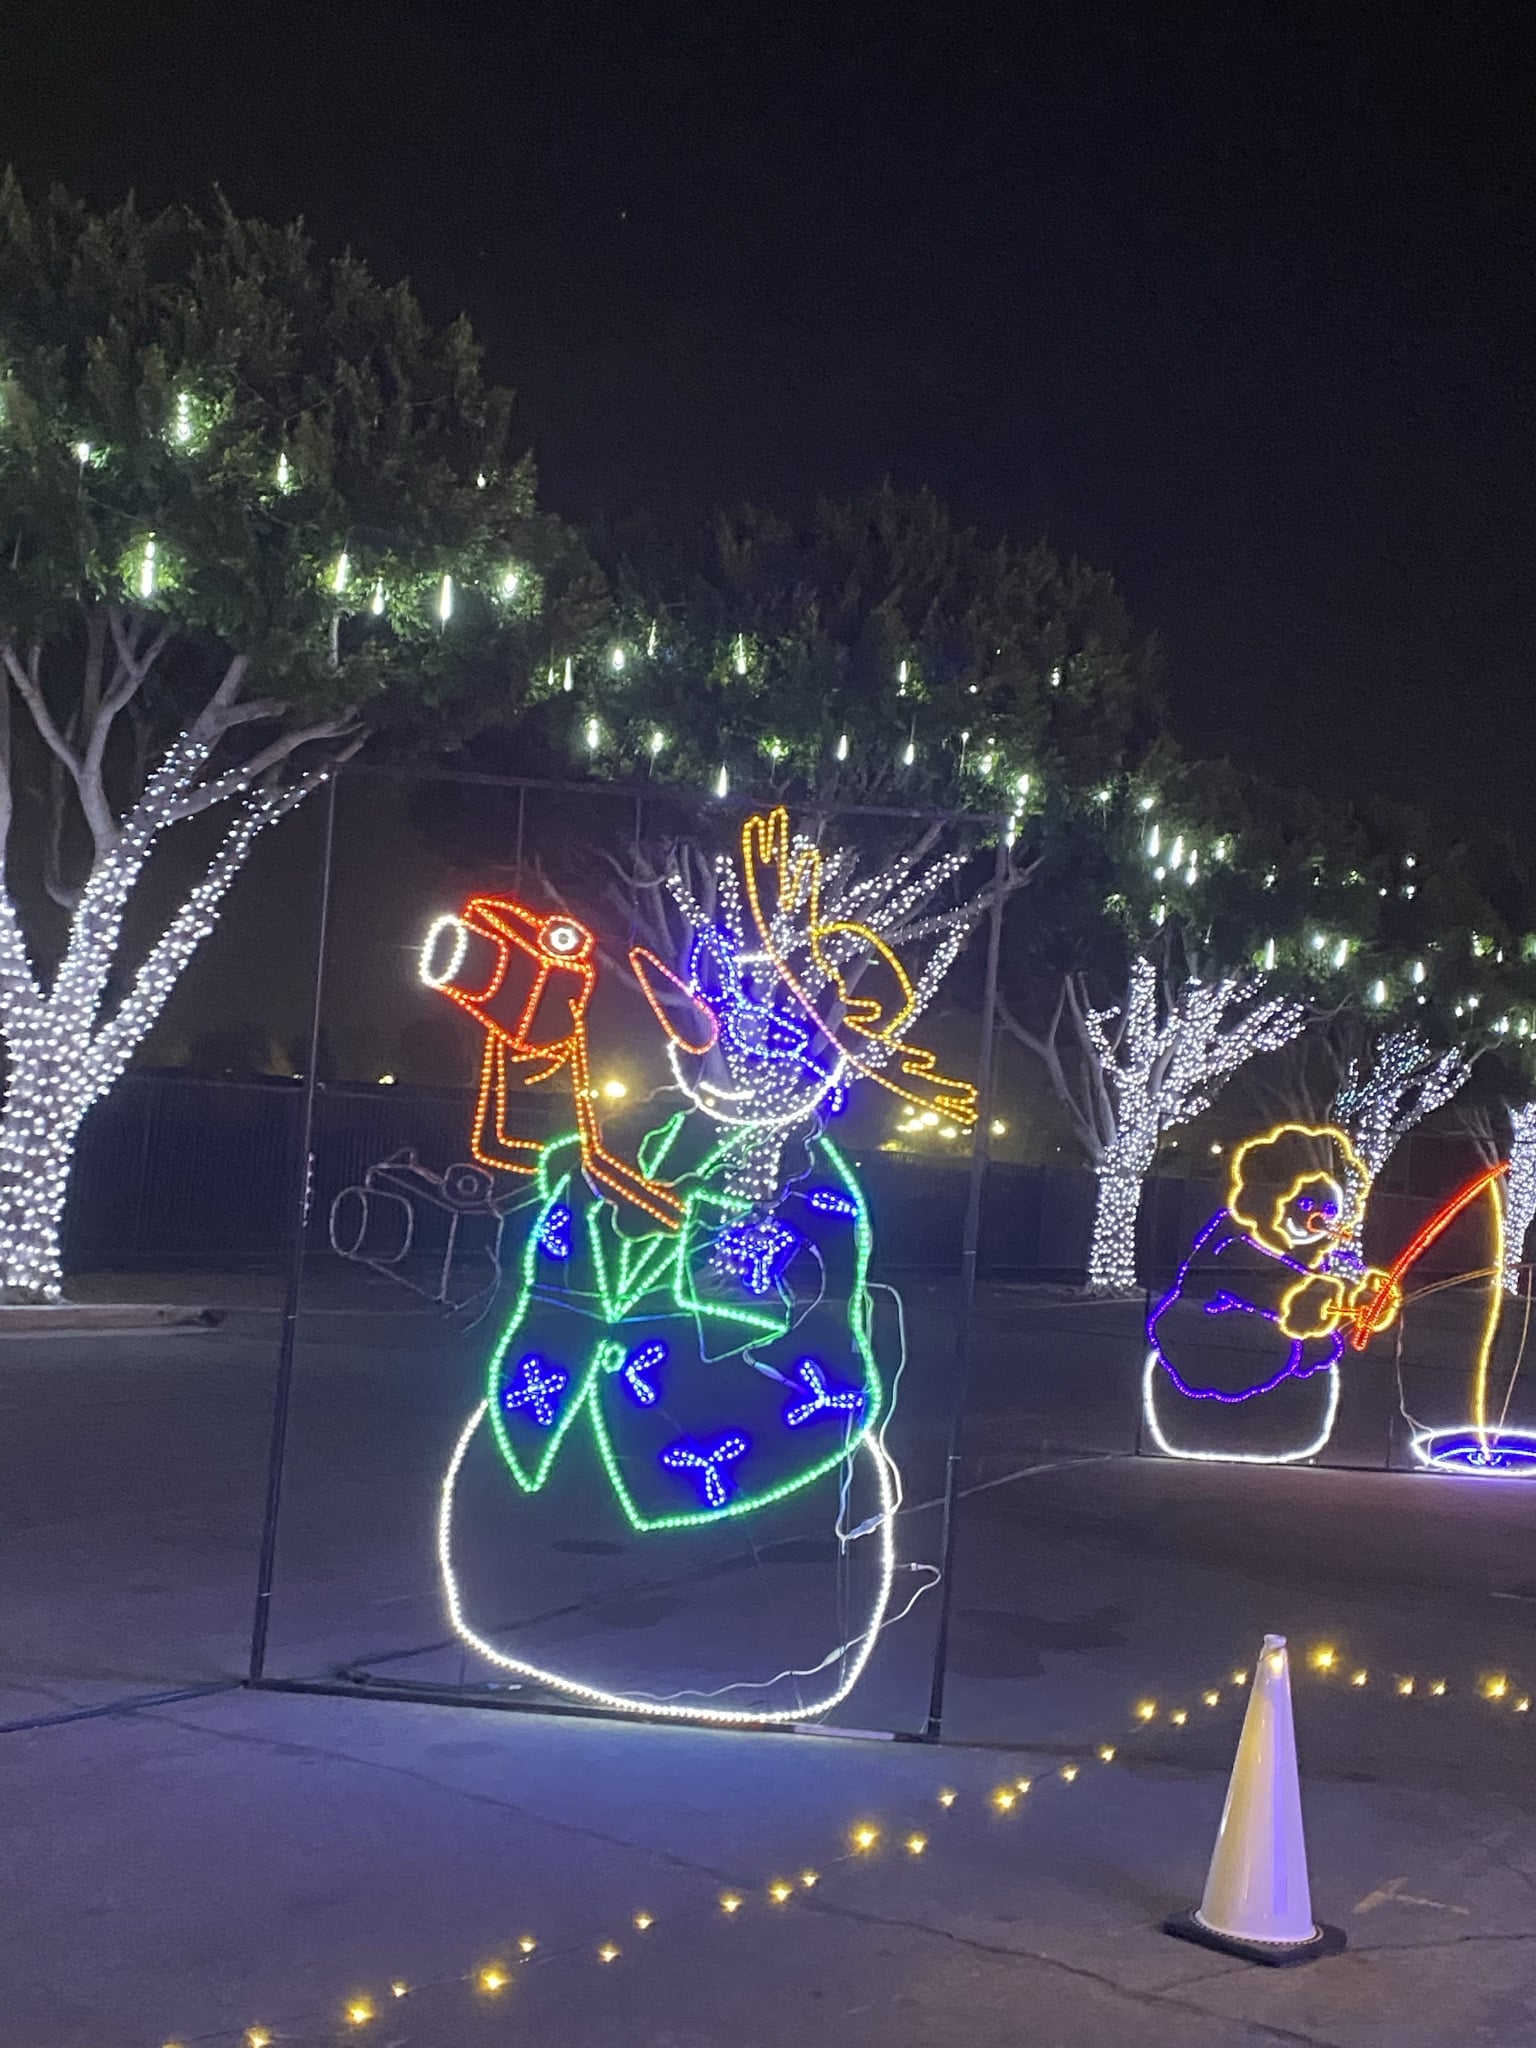 Snowman dressed as tourist with camera Christmas light display